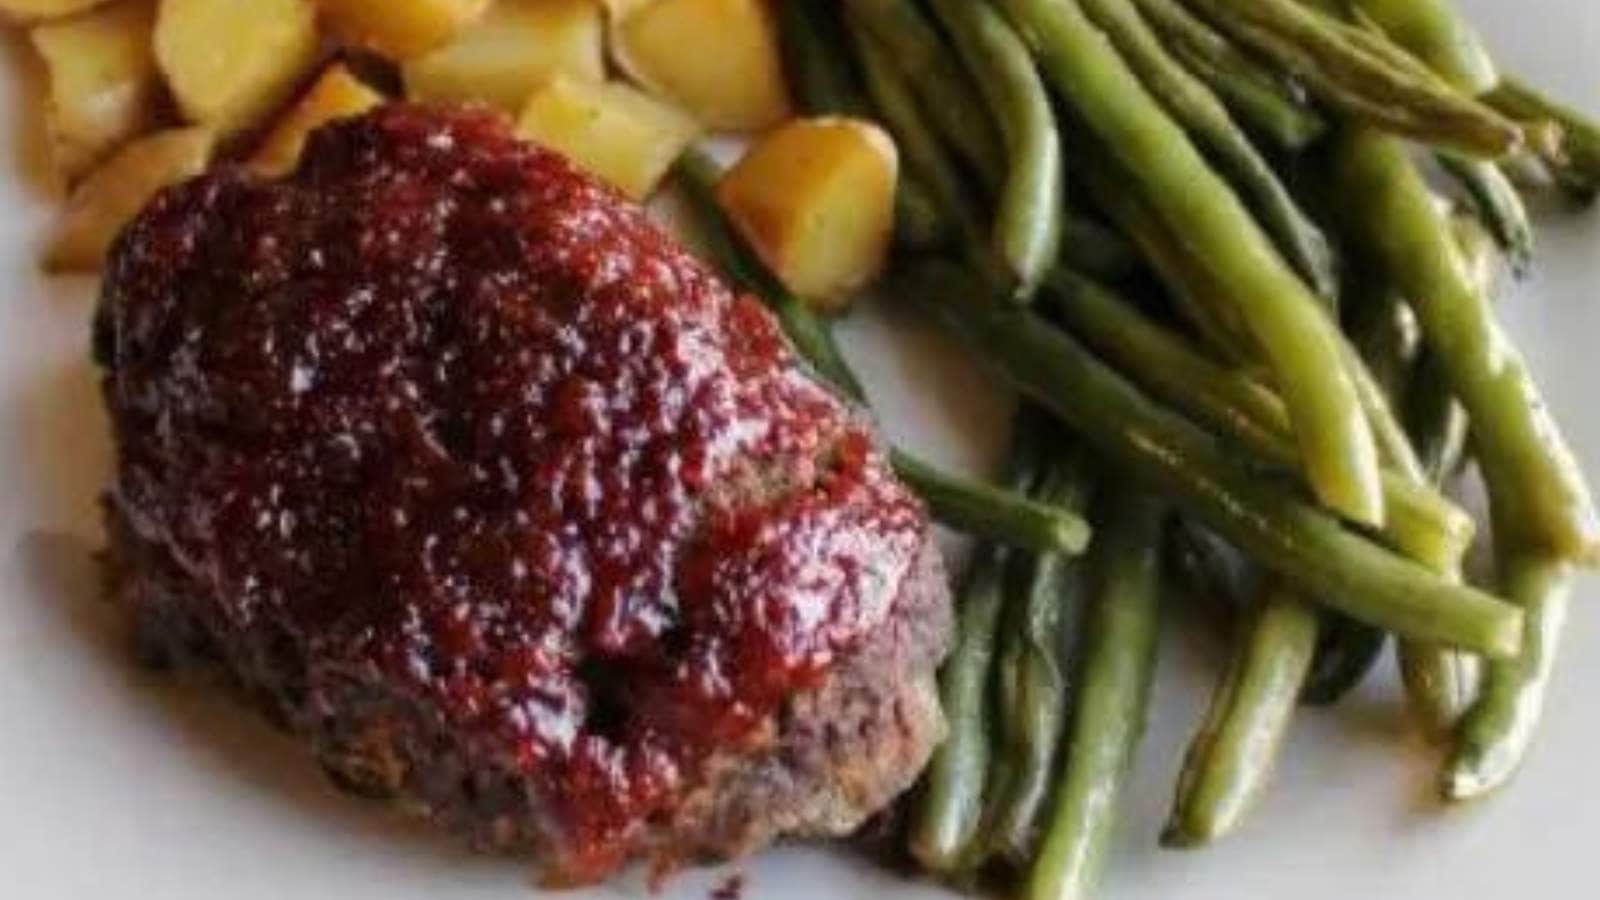 Mini Meatloaf Sheet Pan Meal reccipe by Cooking With Carlee.